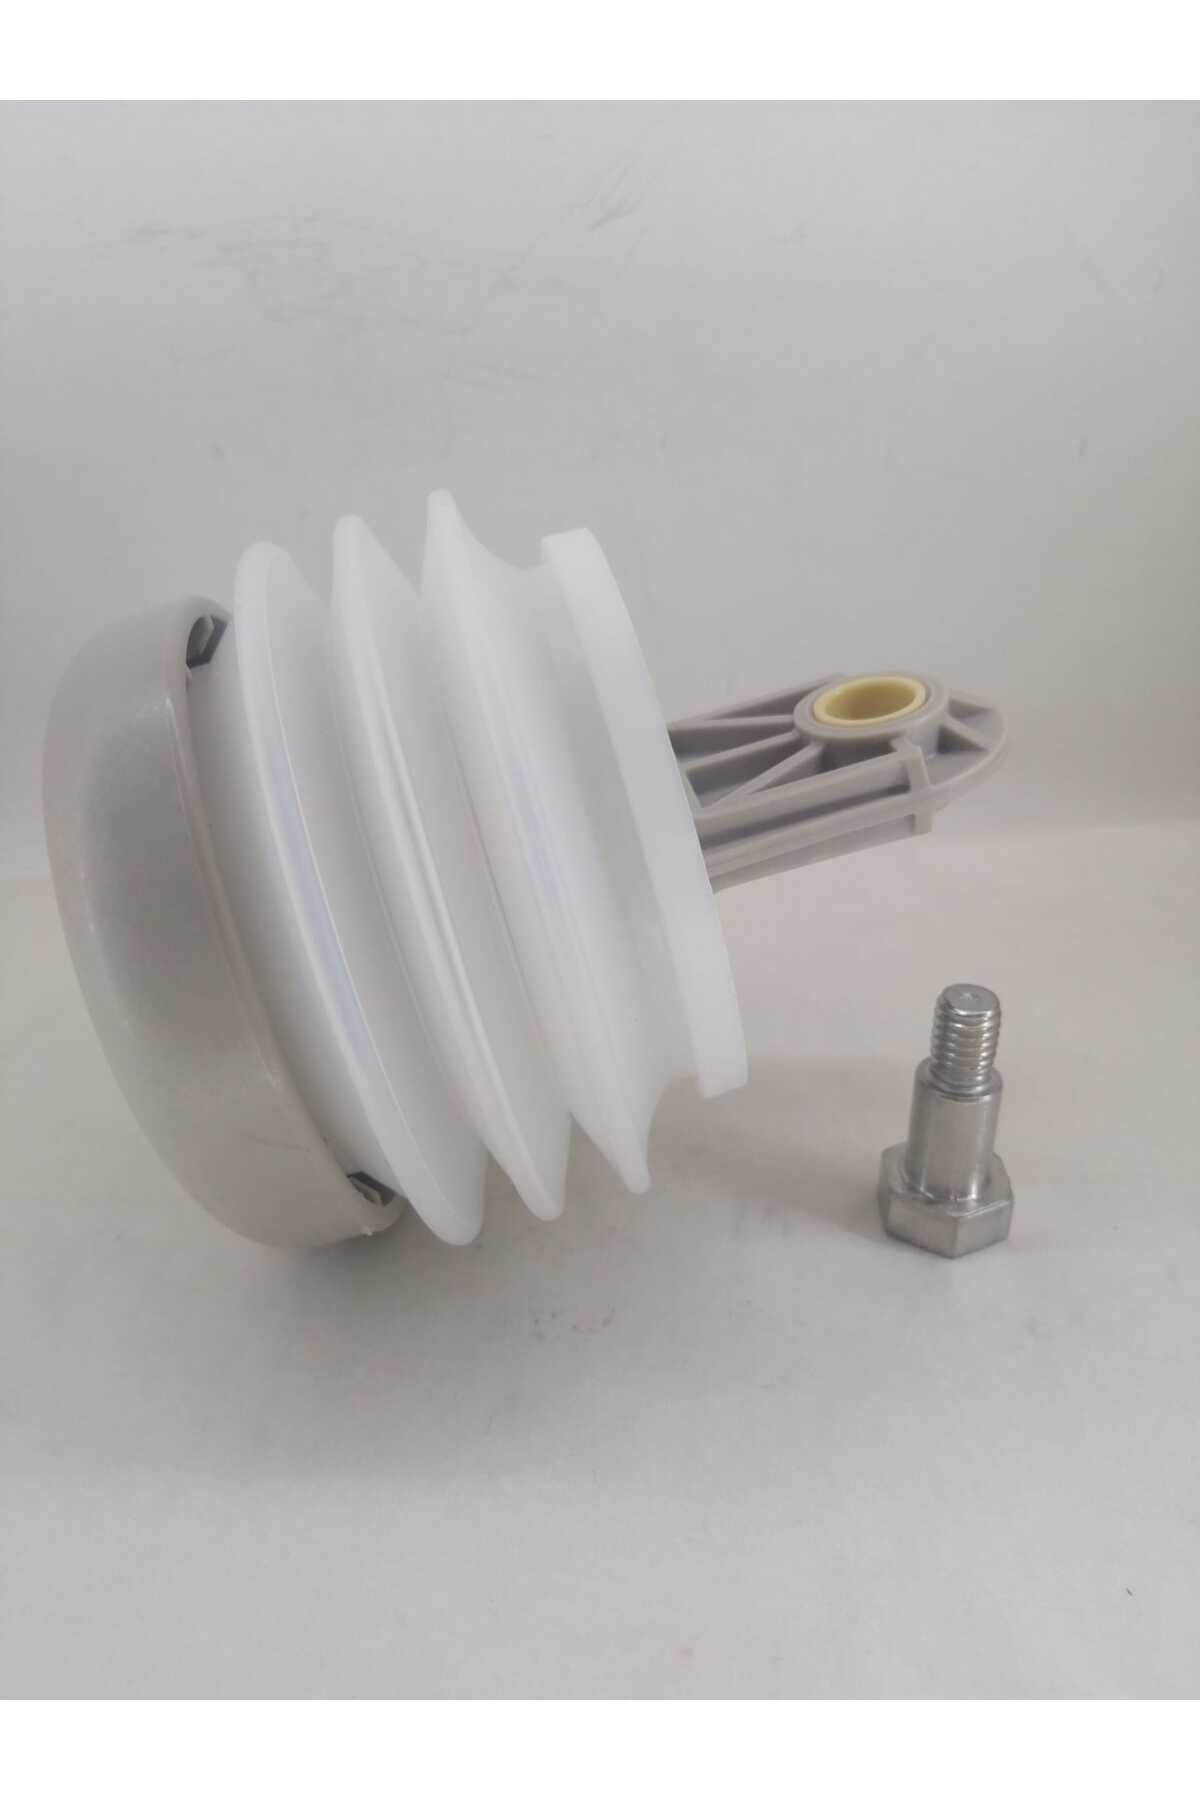 Dometic Pump Bellows Kit Tycneo5hyn170755997988875